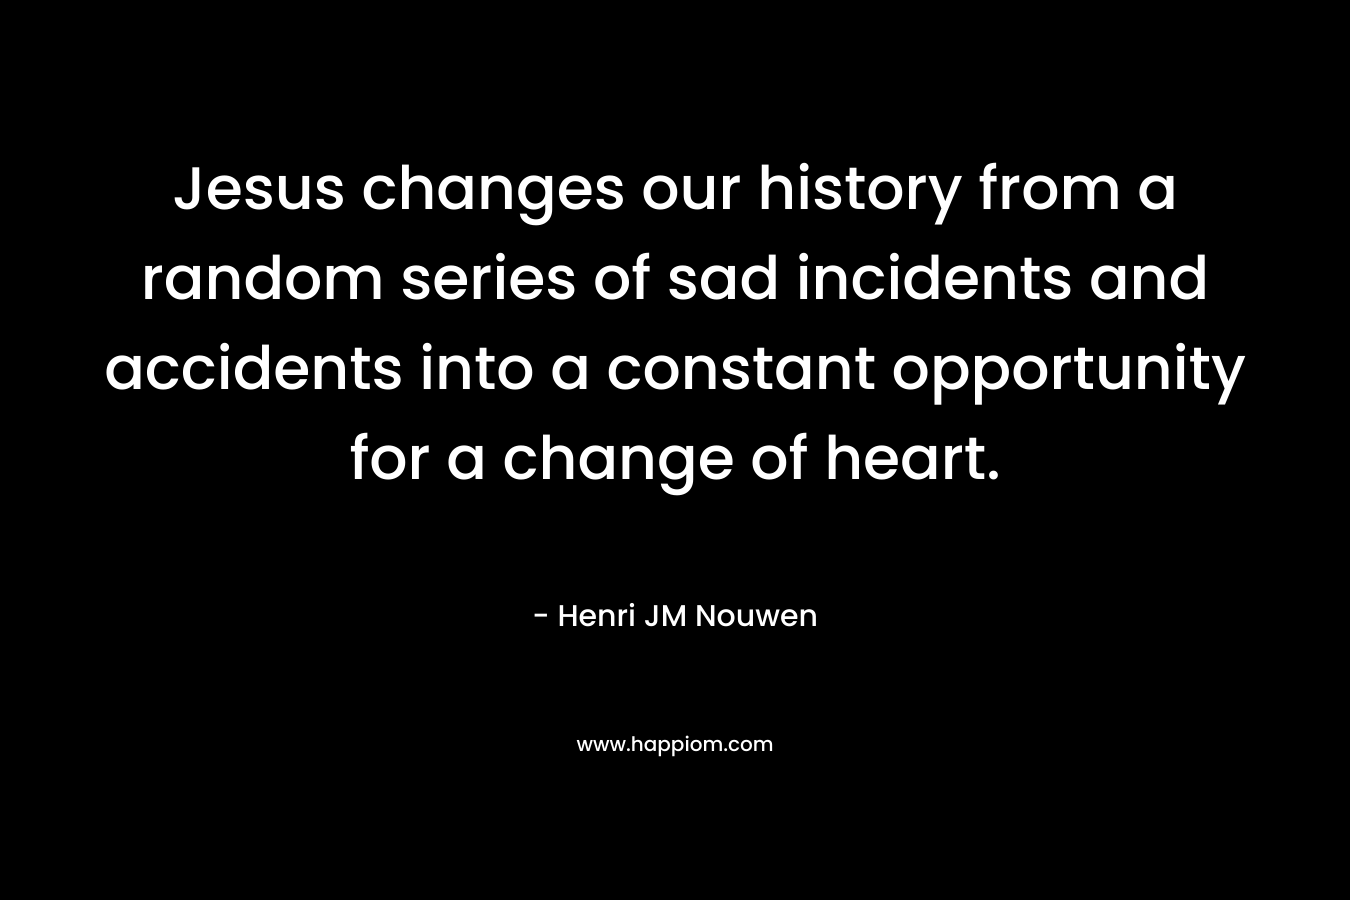 Jesus changes our history from a random series of sad incidents and accidents into a constant opportunity for a change of heart.